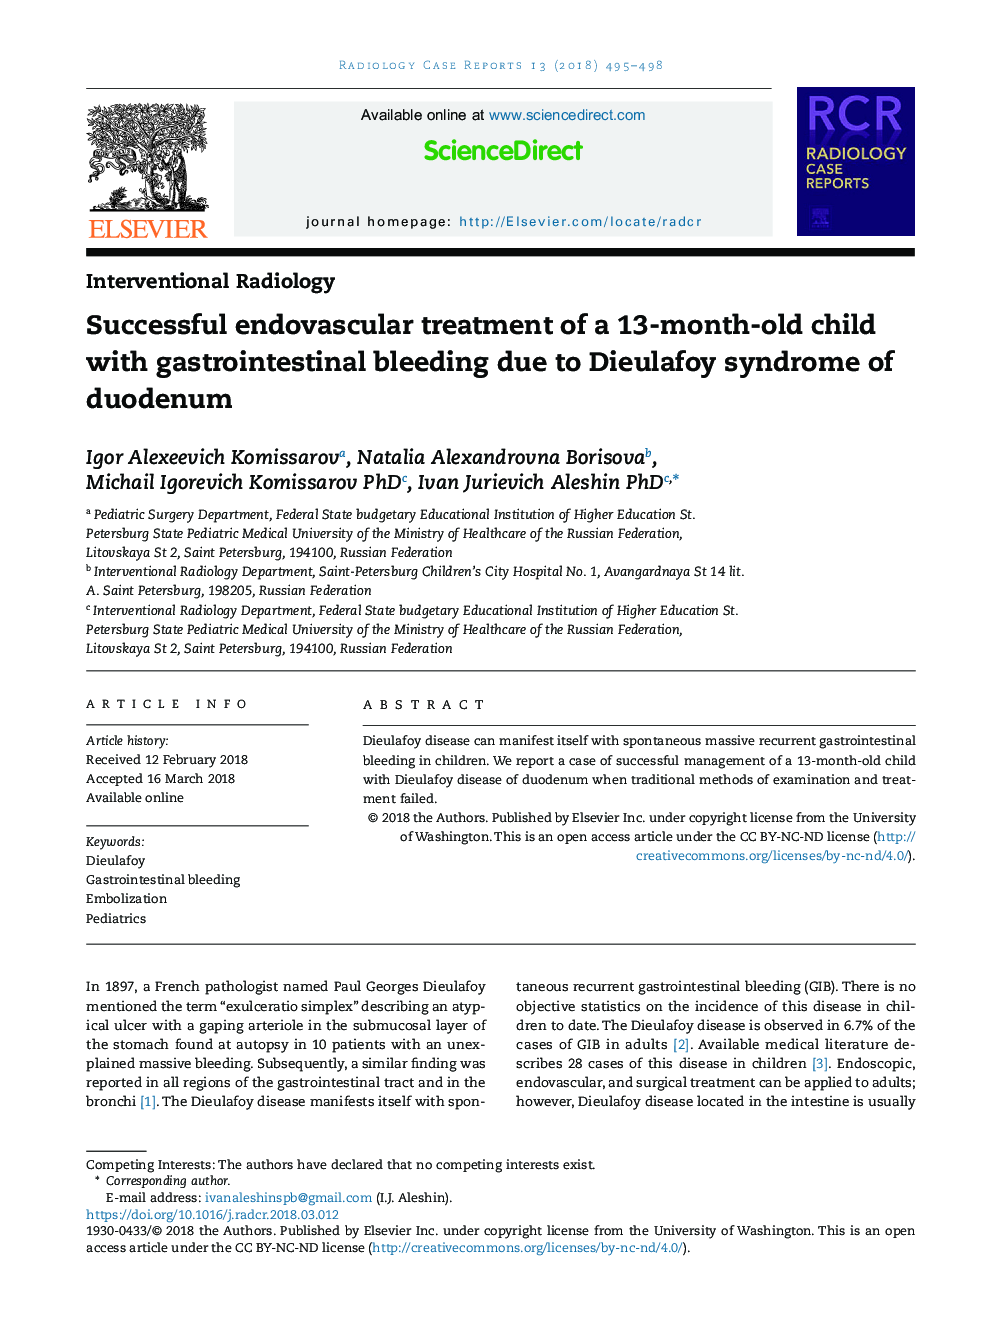 Successful endovascular treatment of a 13-month-old child with gastrointestinal bleeding due to Dieulafoy syndrome of duodenum